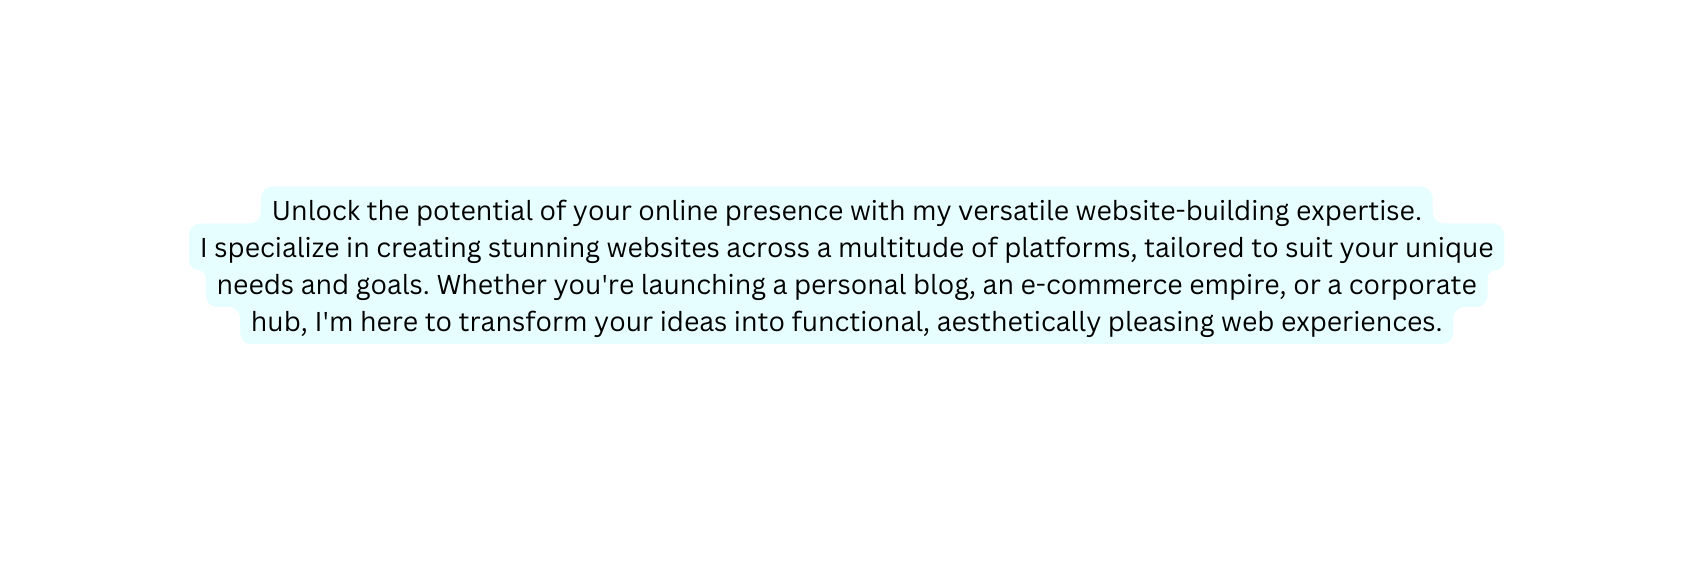 Unlock the potential of your online presence with my versatile website building expertise I specialize in creating stunning websites across a multitude of platforms tailored to suit your unique needs and goals Whether you re launching a personal blog an e commerce empire or a corporate hub I m here to transform your ideas into functional aesthetically pleasing web experiences